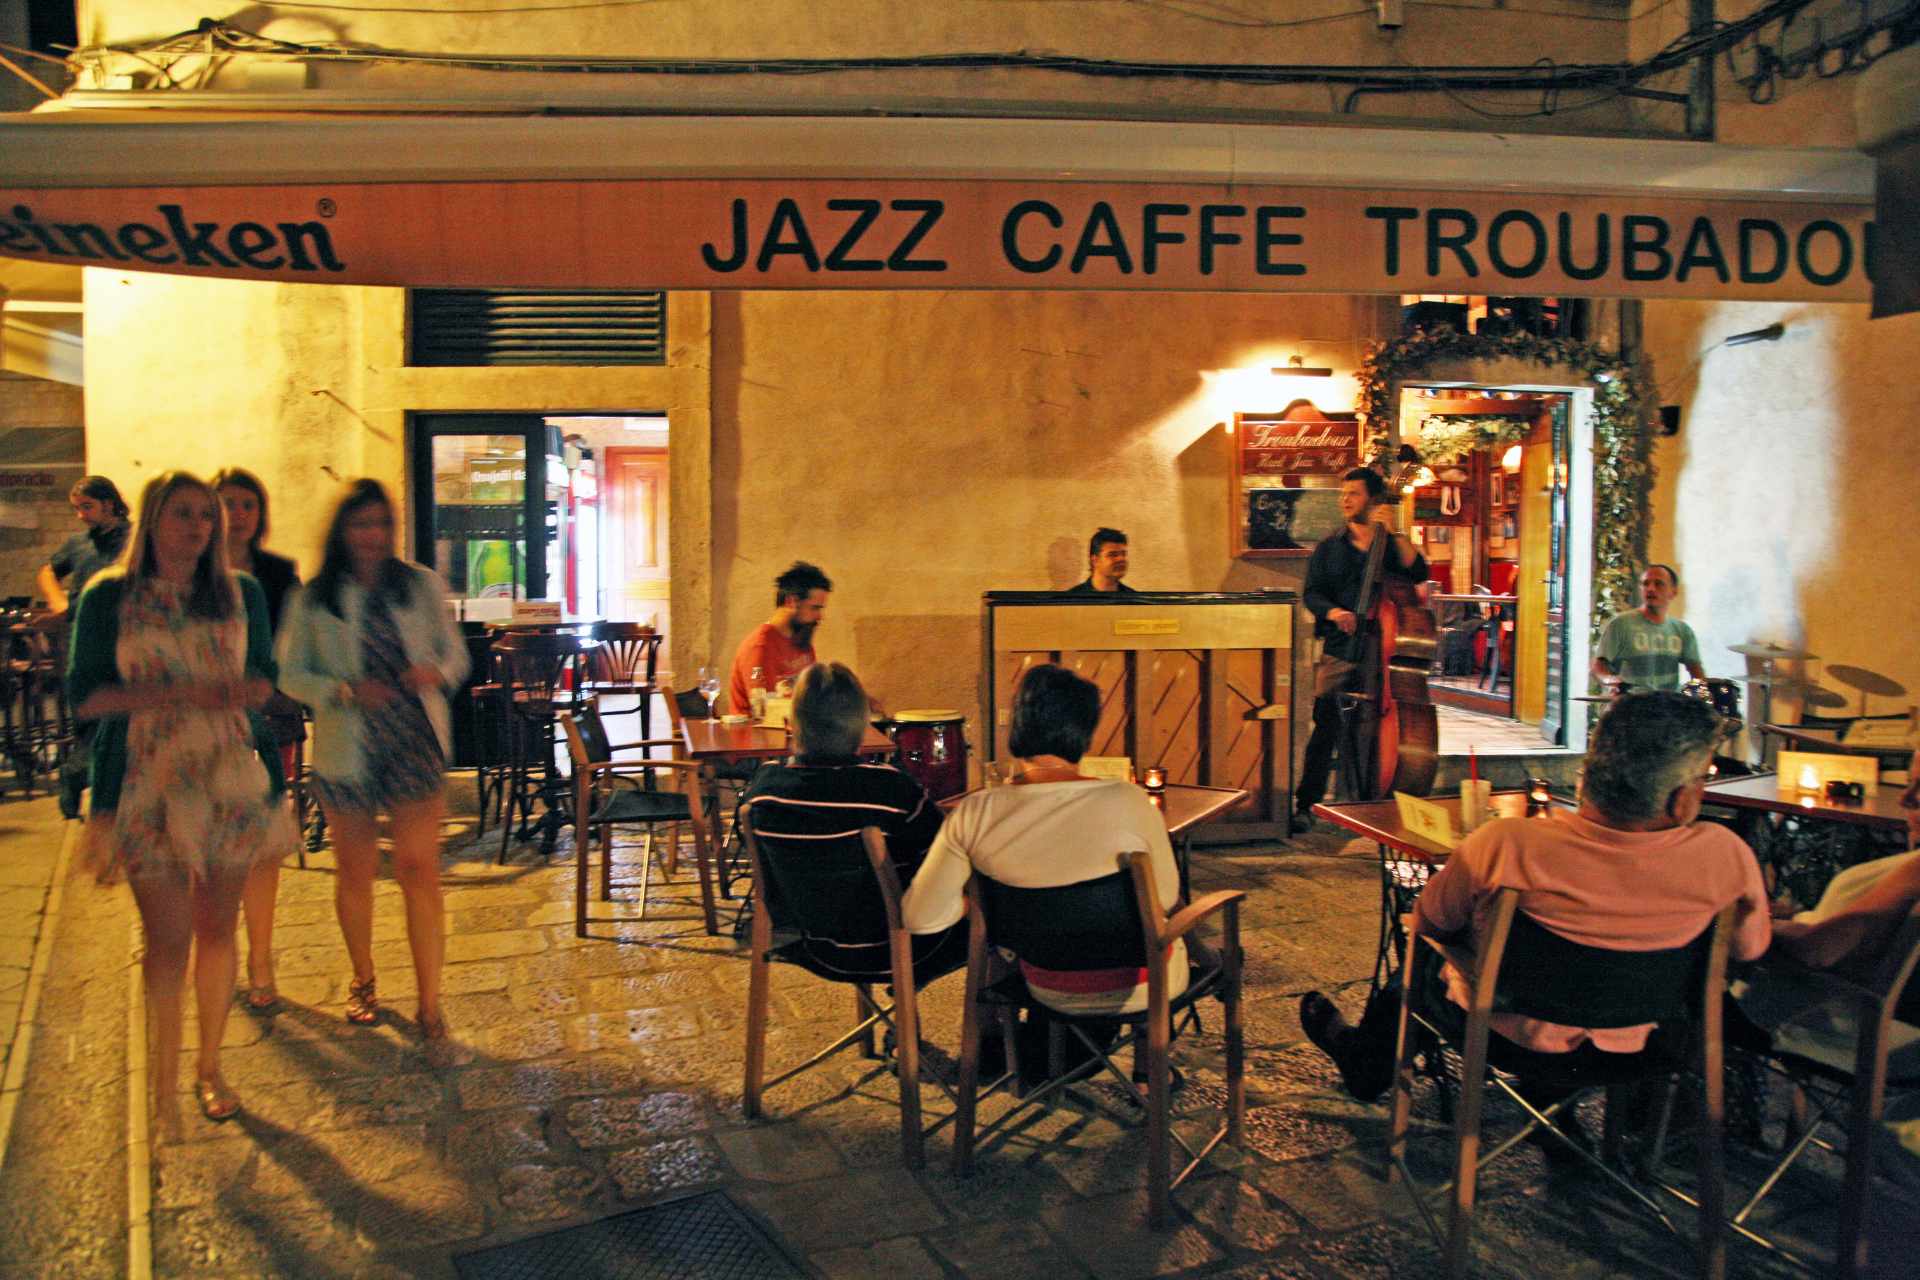 people-listening-to-jazz-at-troubadour-hard-jazz-caffe-in-evening